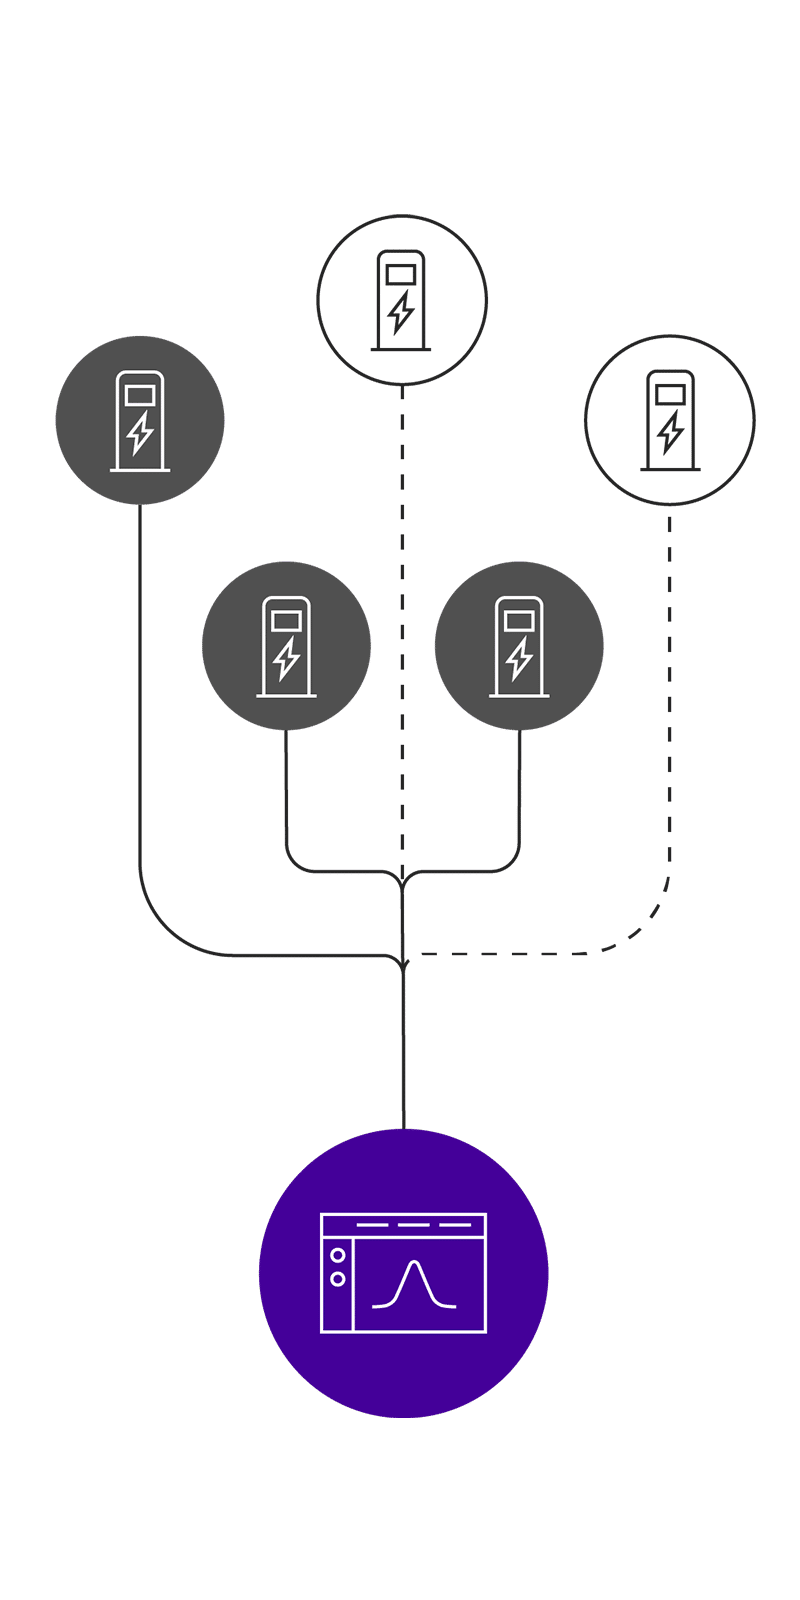 Graphical representation of the Evercharge software for monitoring an e-charging network for electric vehicles